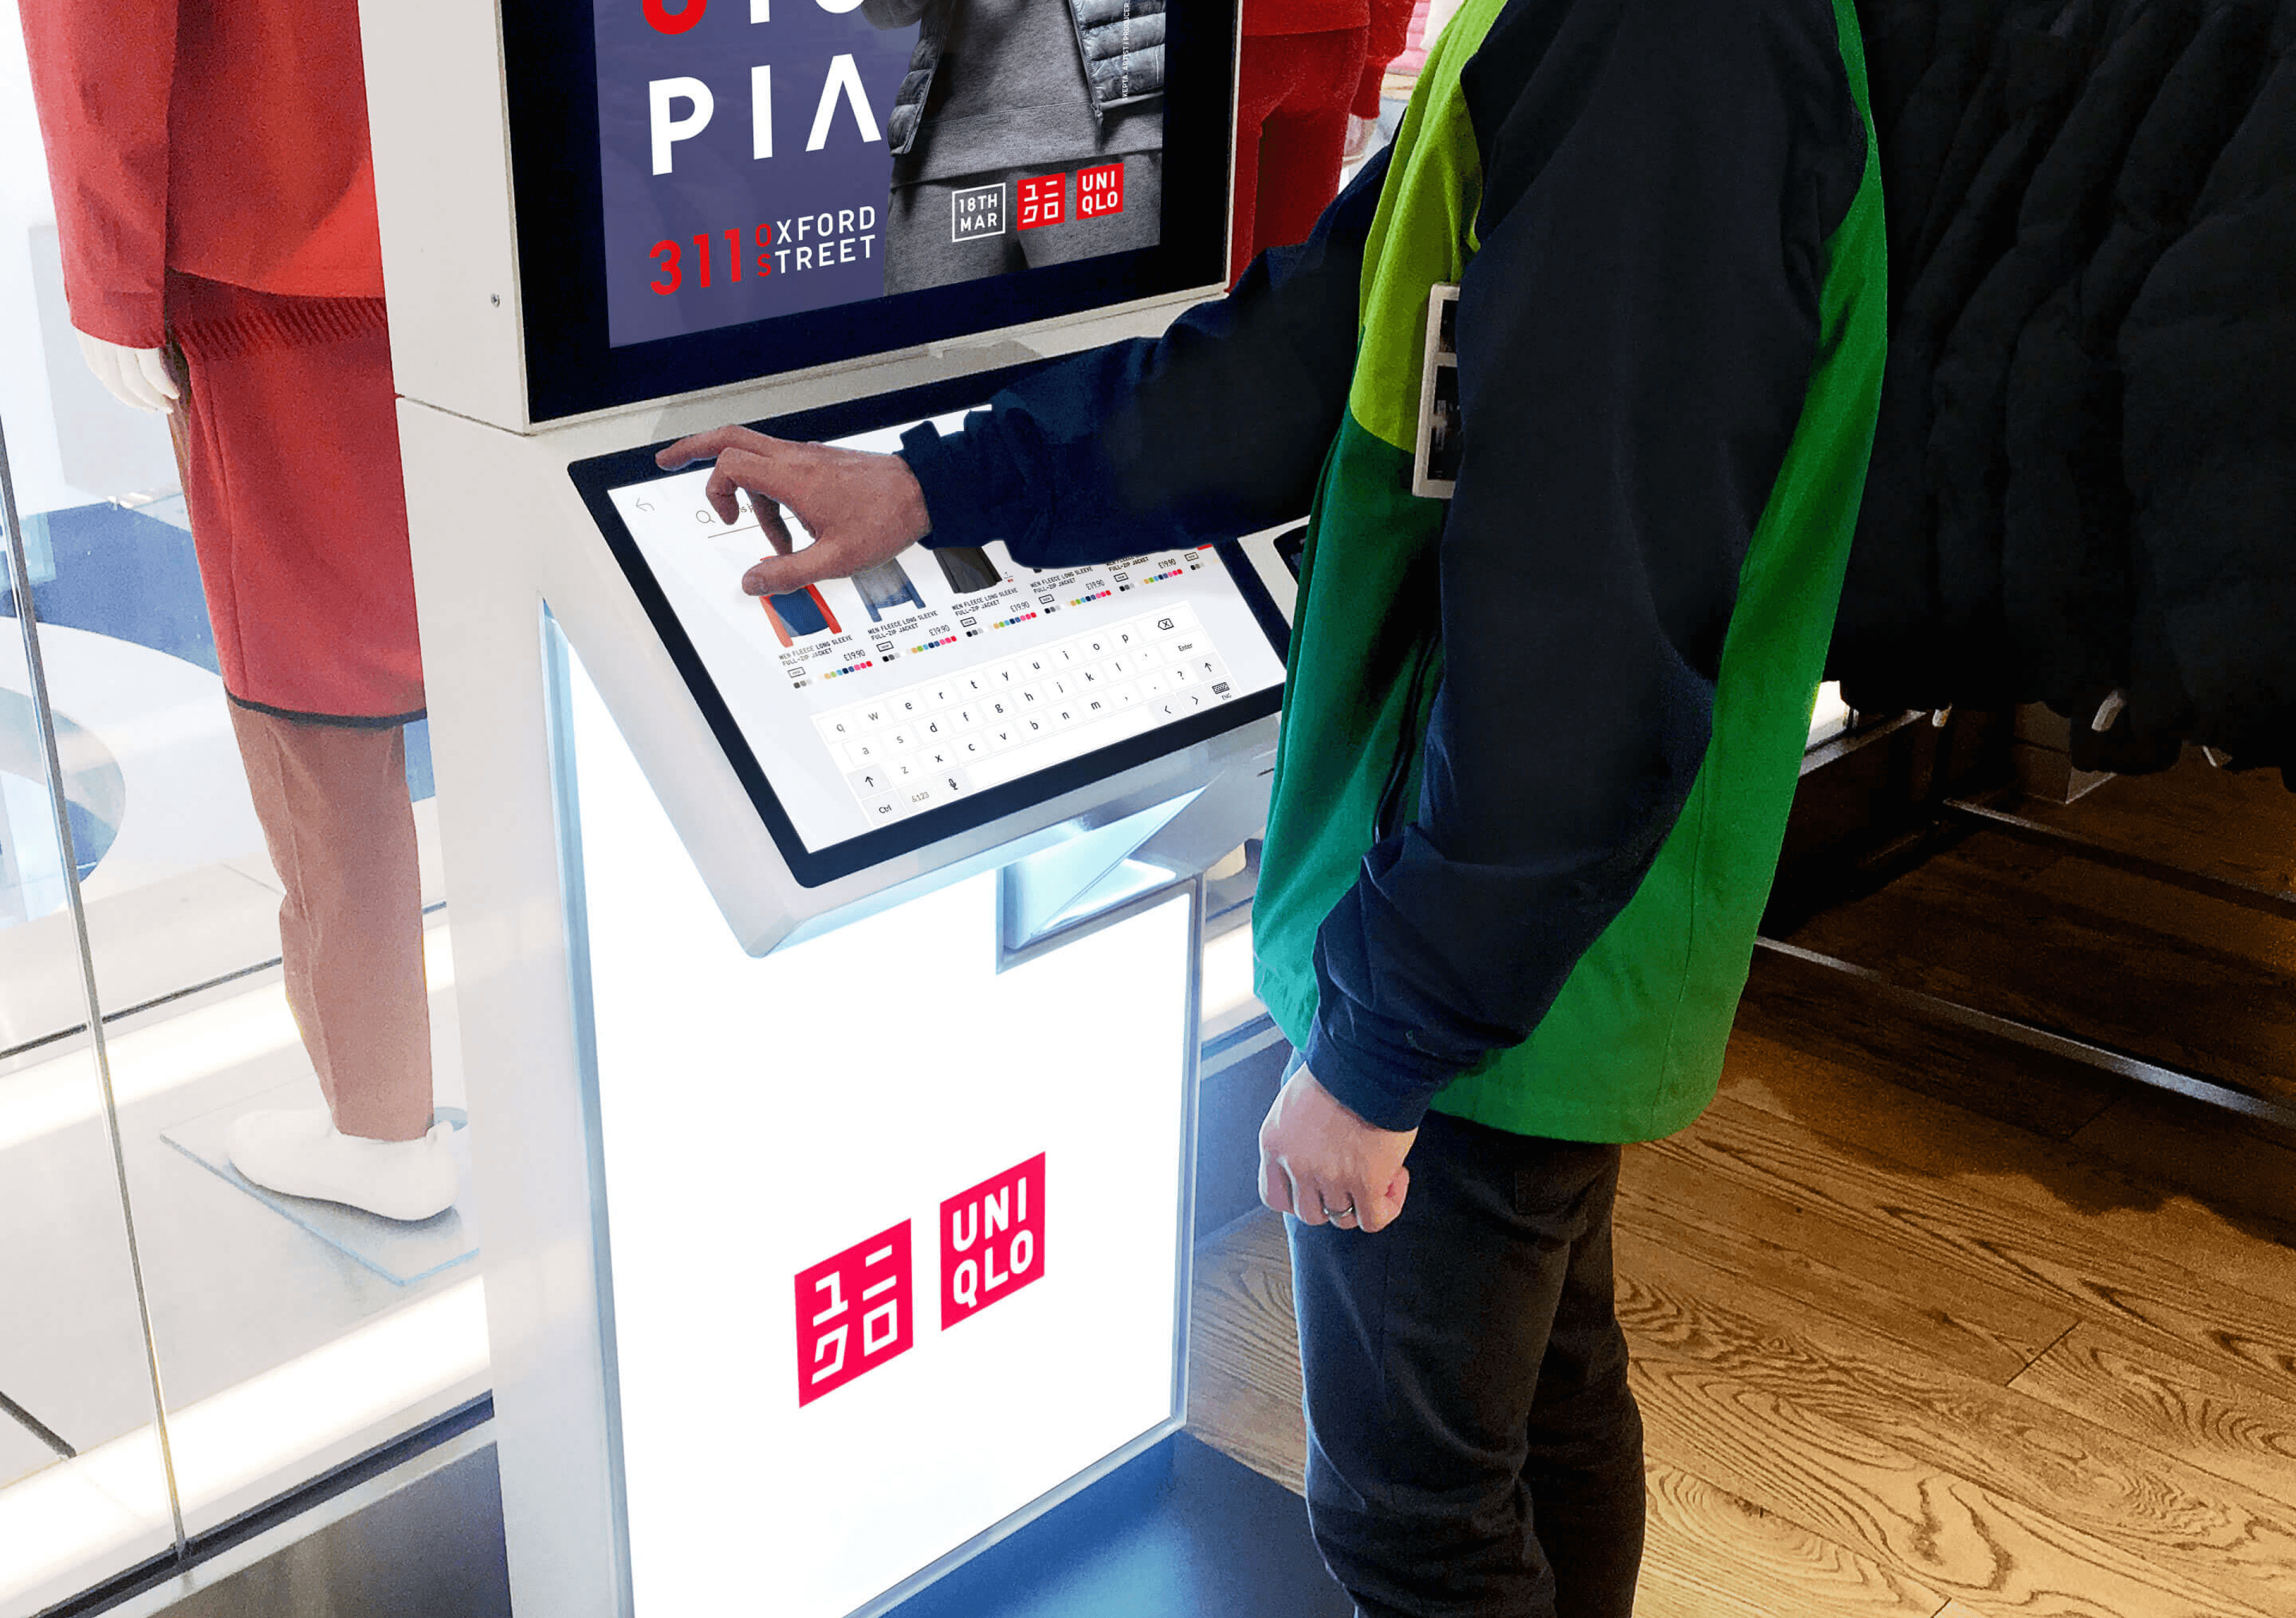 A customer is seen using the kiosk in the Oxford St store in London